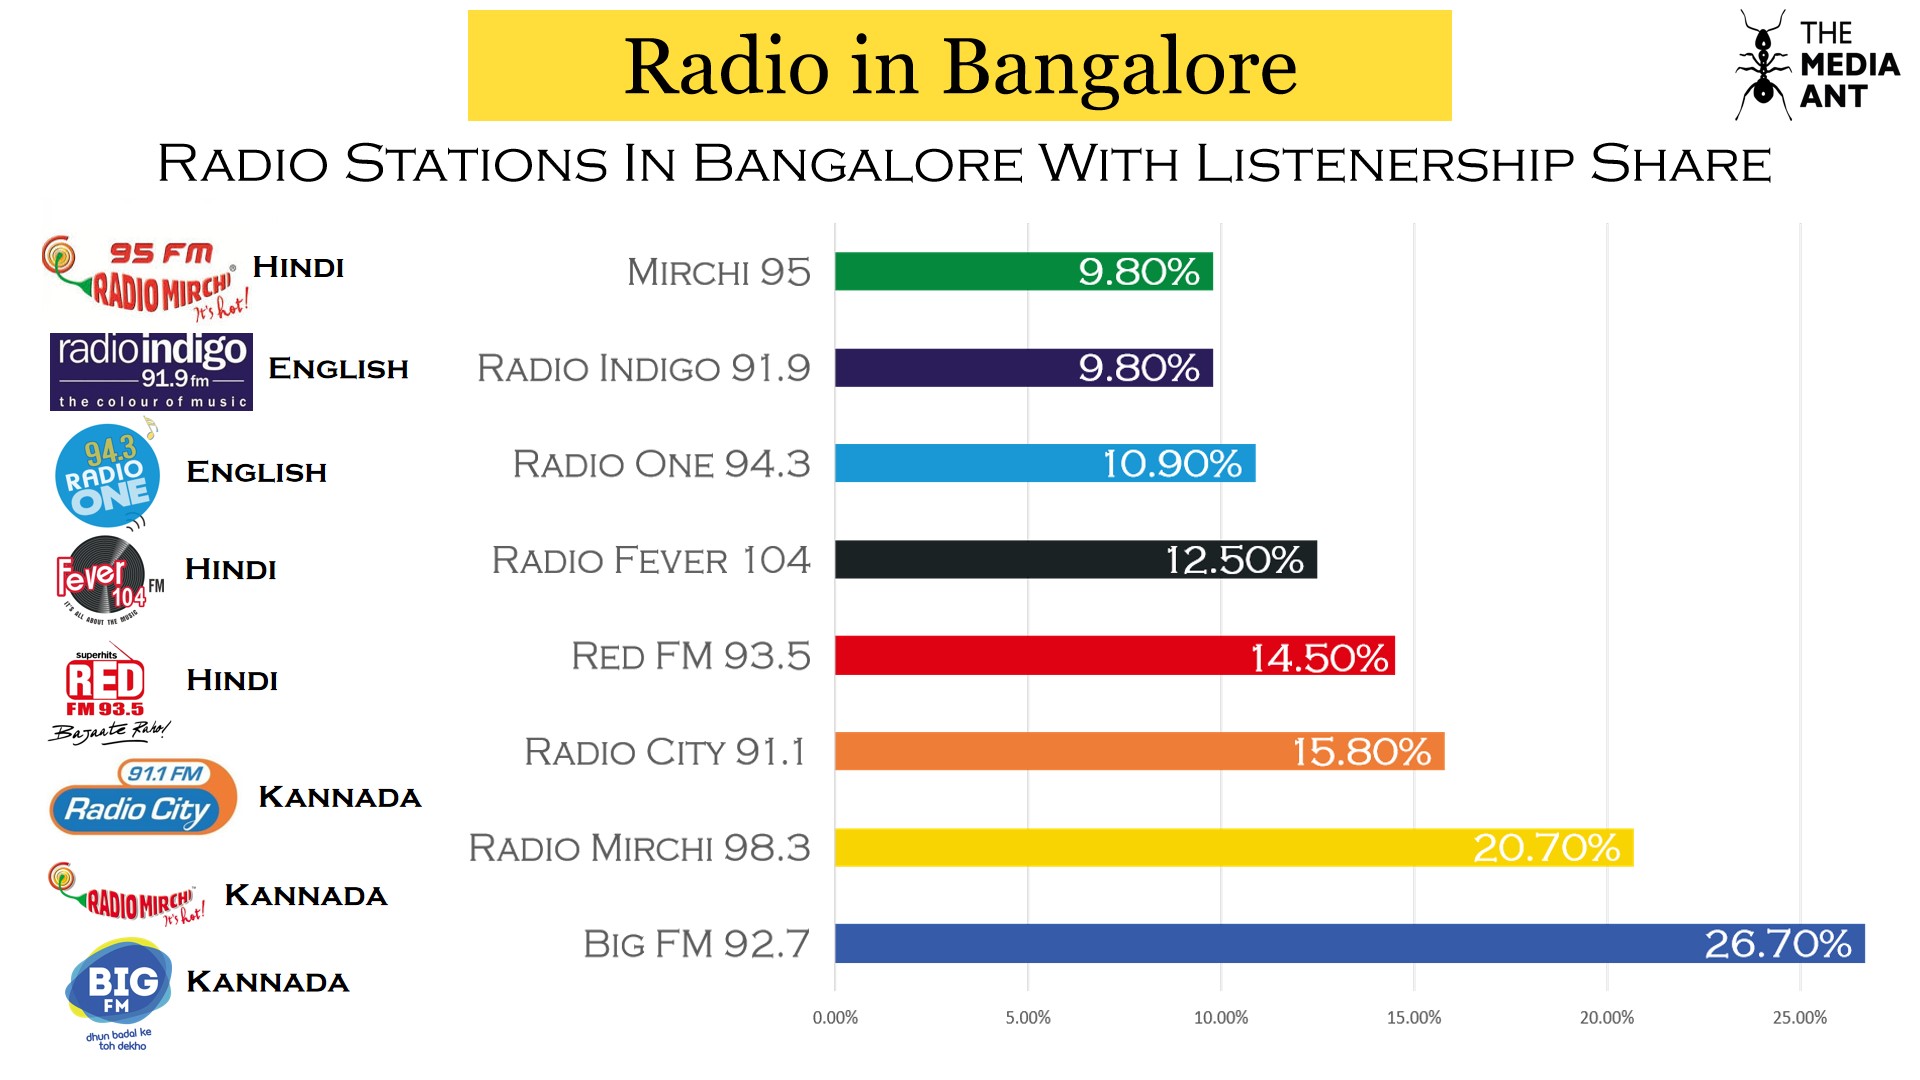 Listenership of all the radio stations in Bangalore